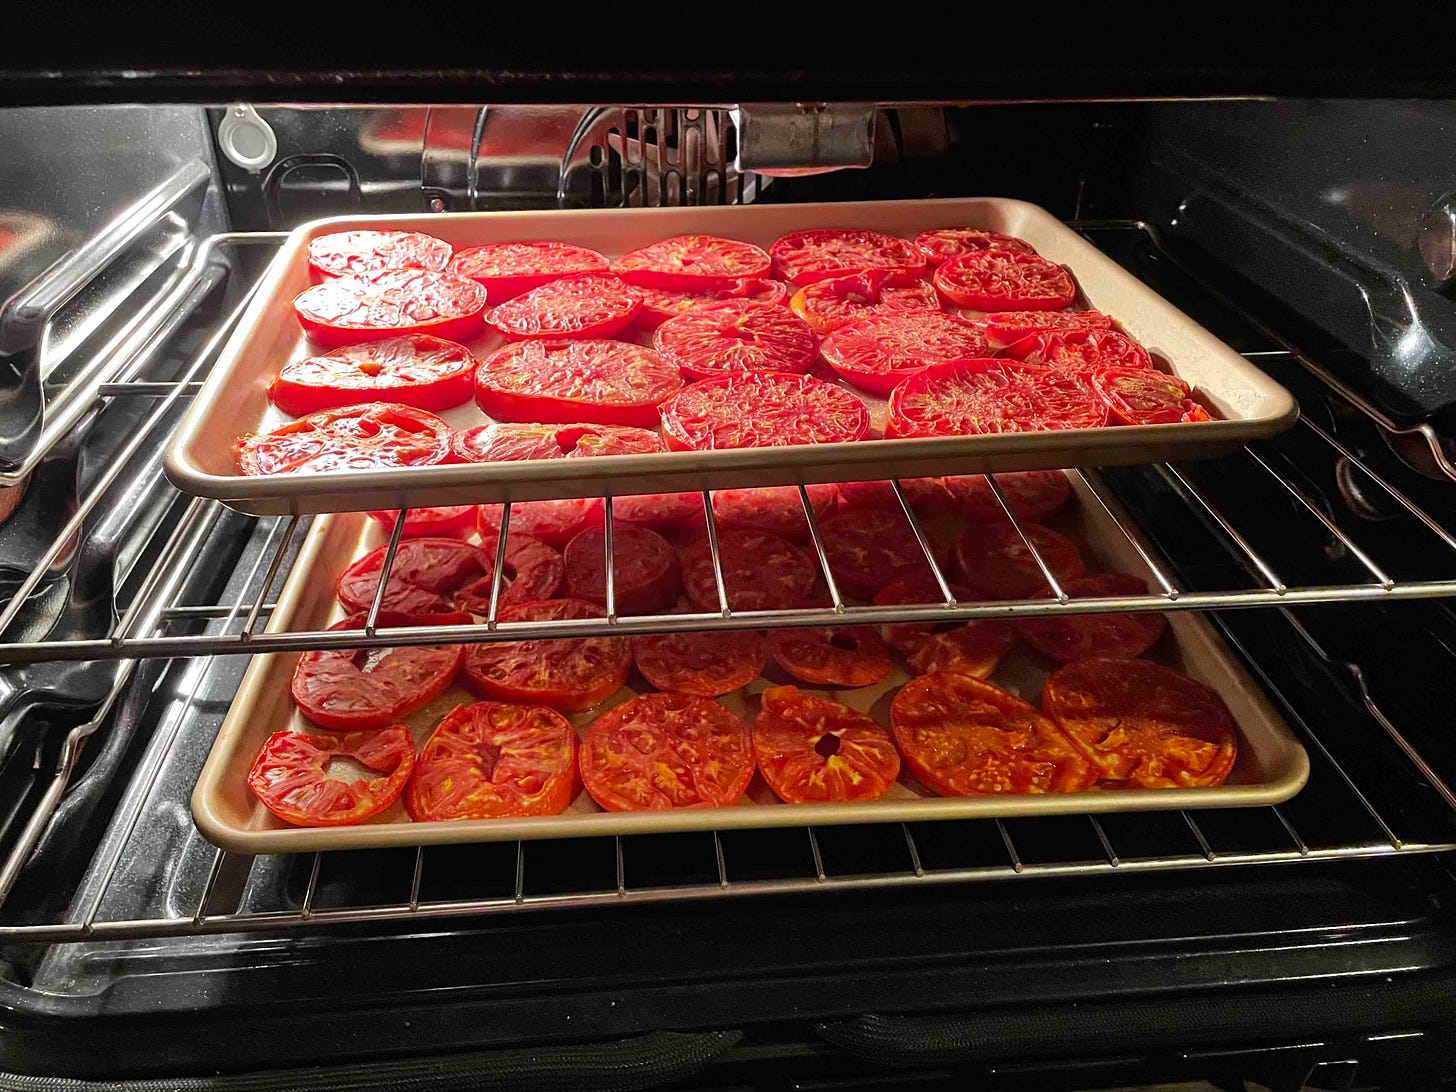 Two sheet pans full of sliced tomatoes on the racks of an open oven.